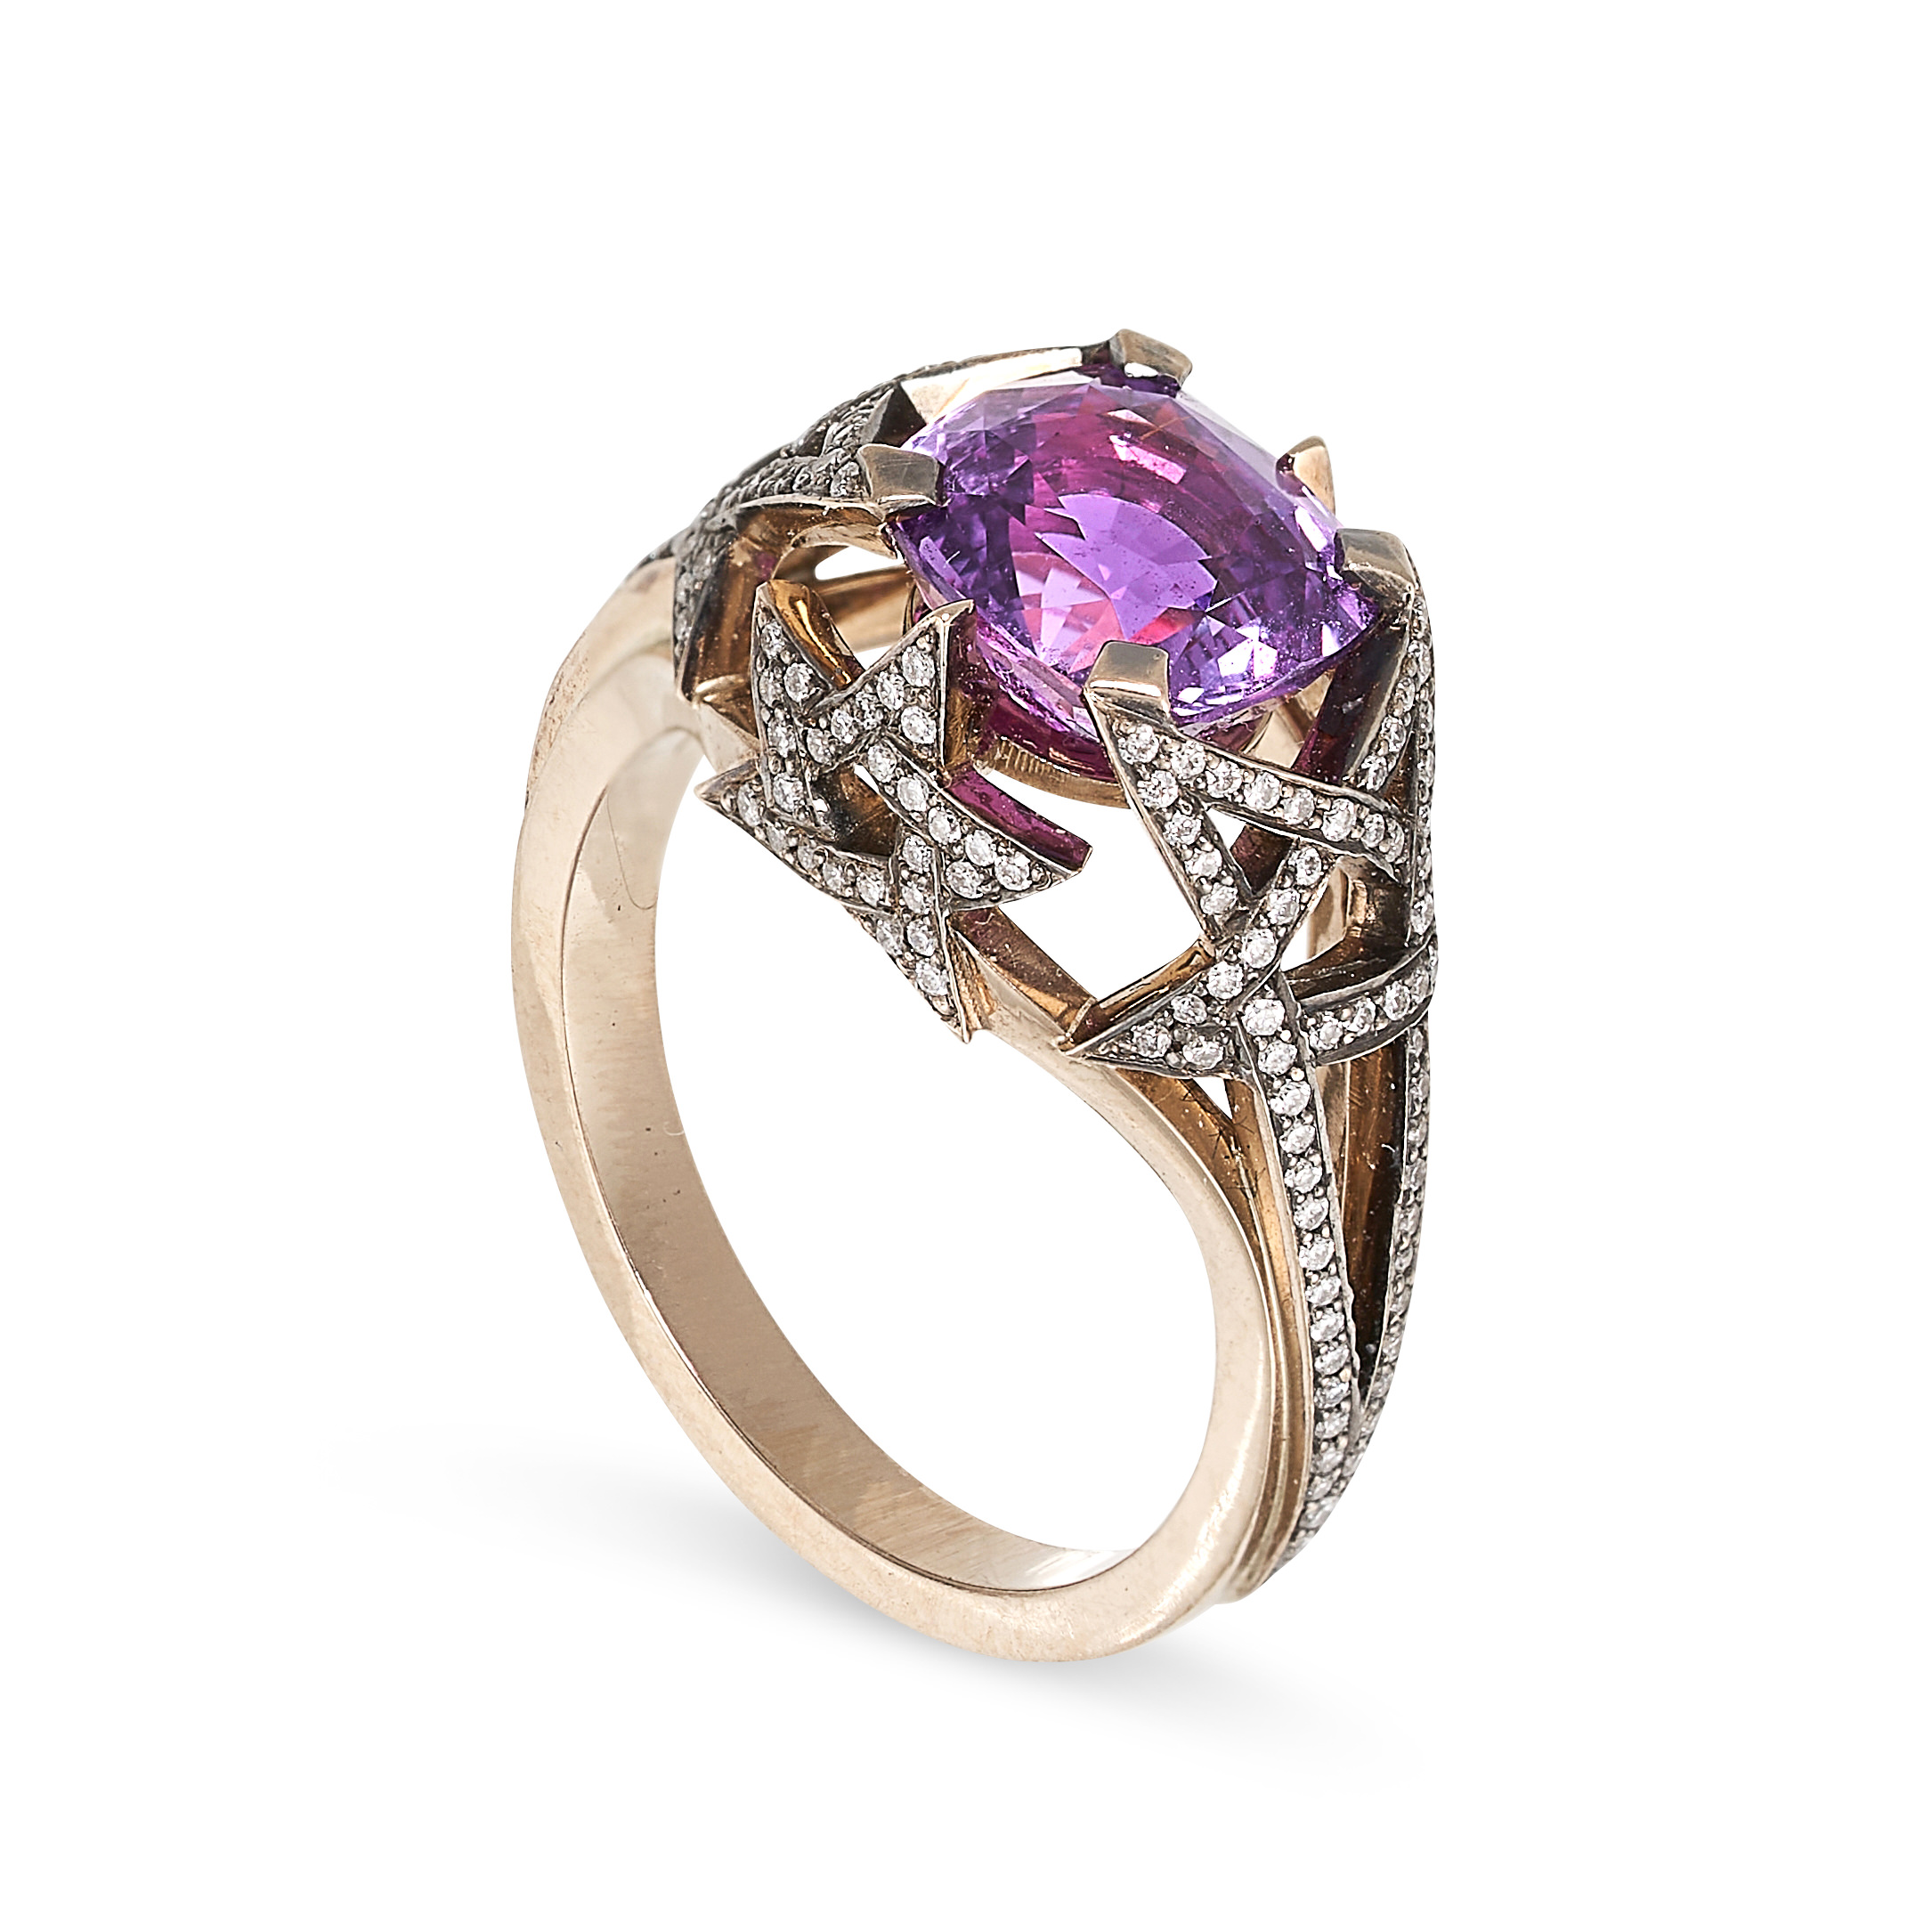 SOLANGE AZAGURY-PARTRIDGE, A PURPLE SAPPHIRE AND DIAMOND BABY STAR RING in 18ct gold, comprising a - Image 2 of 2